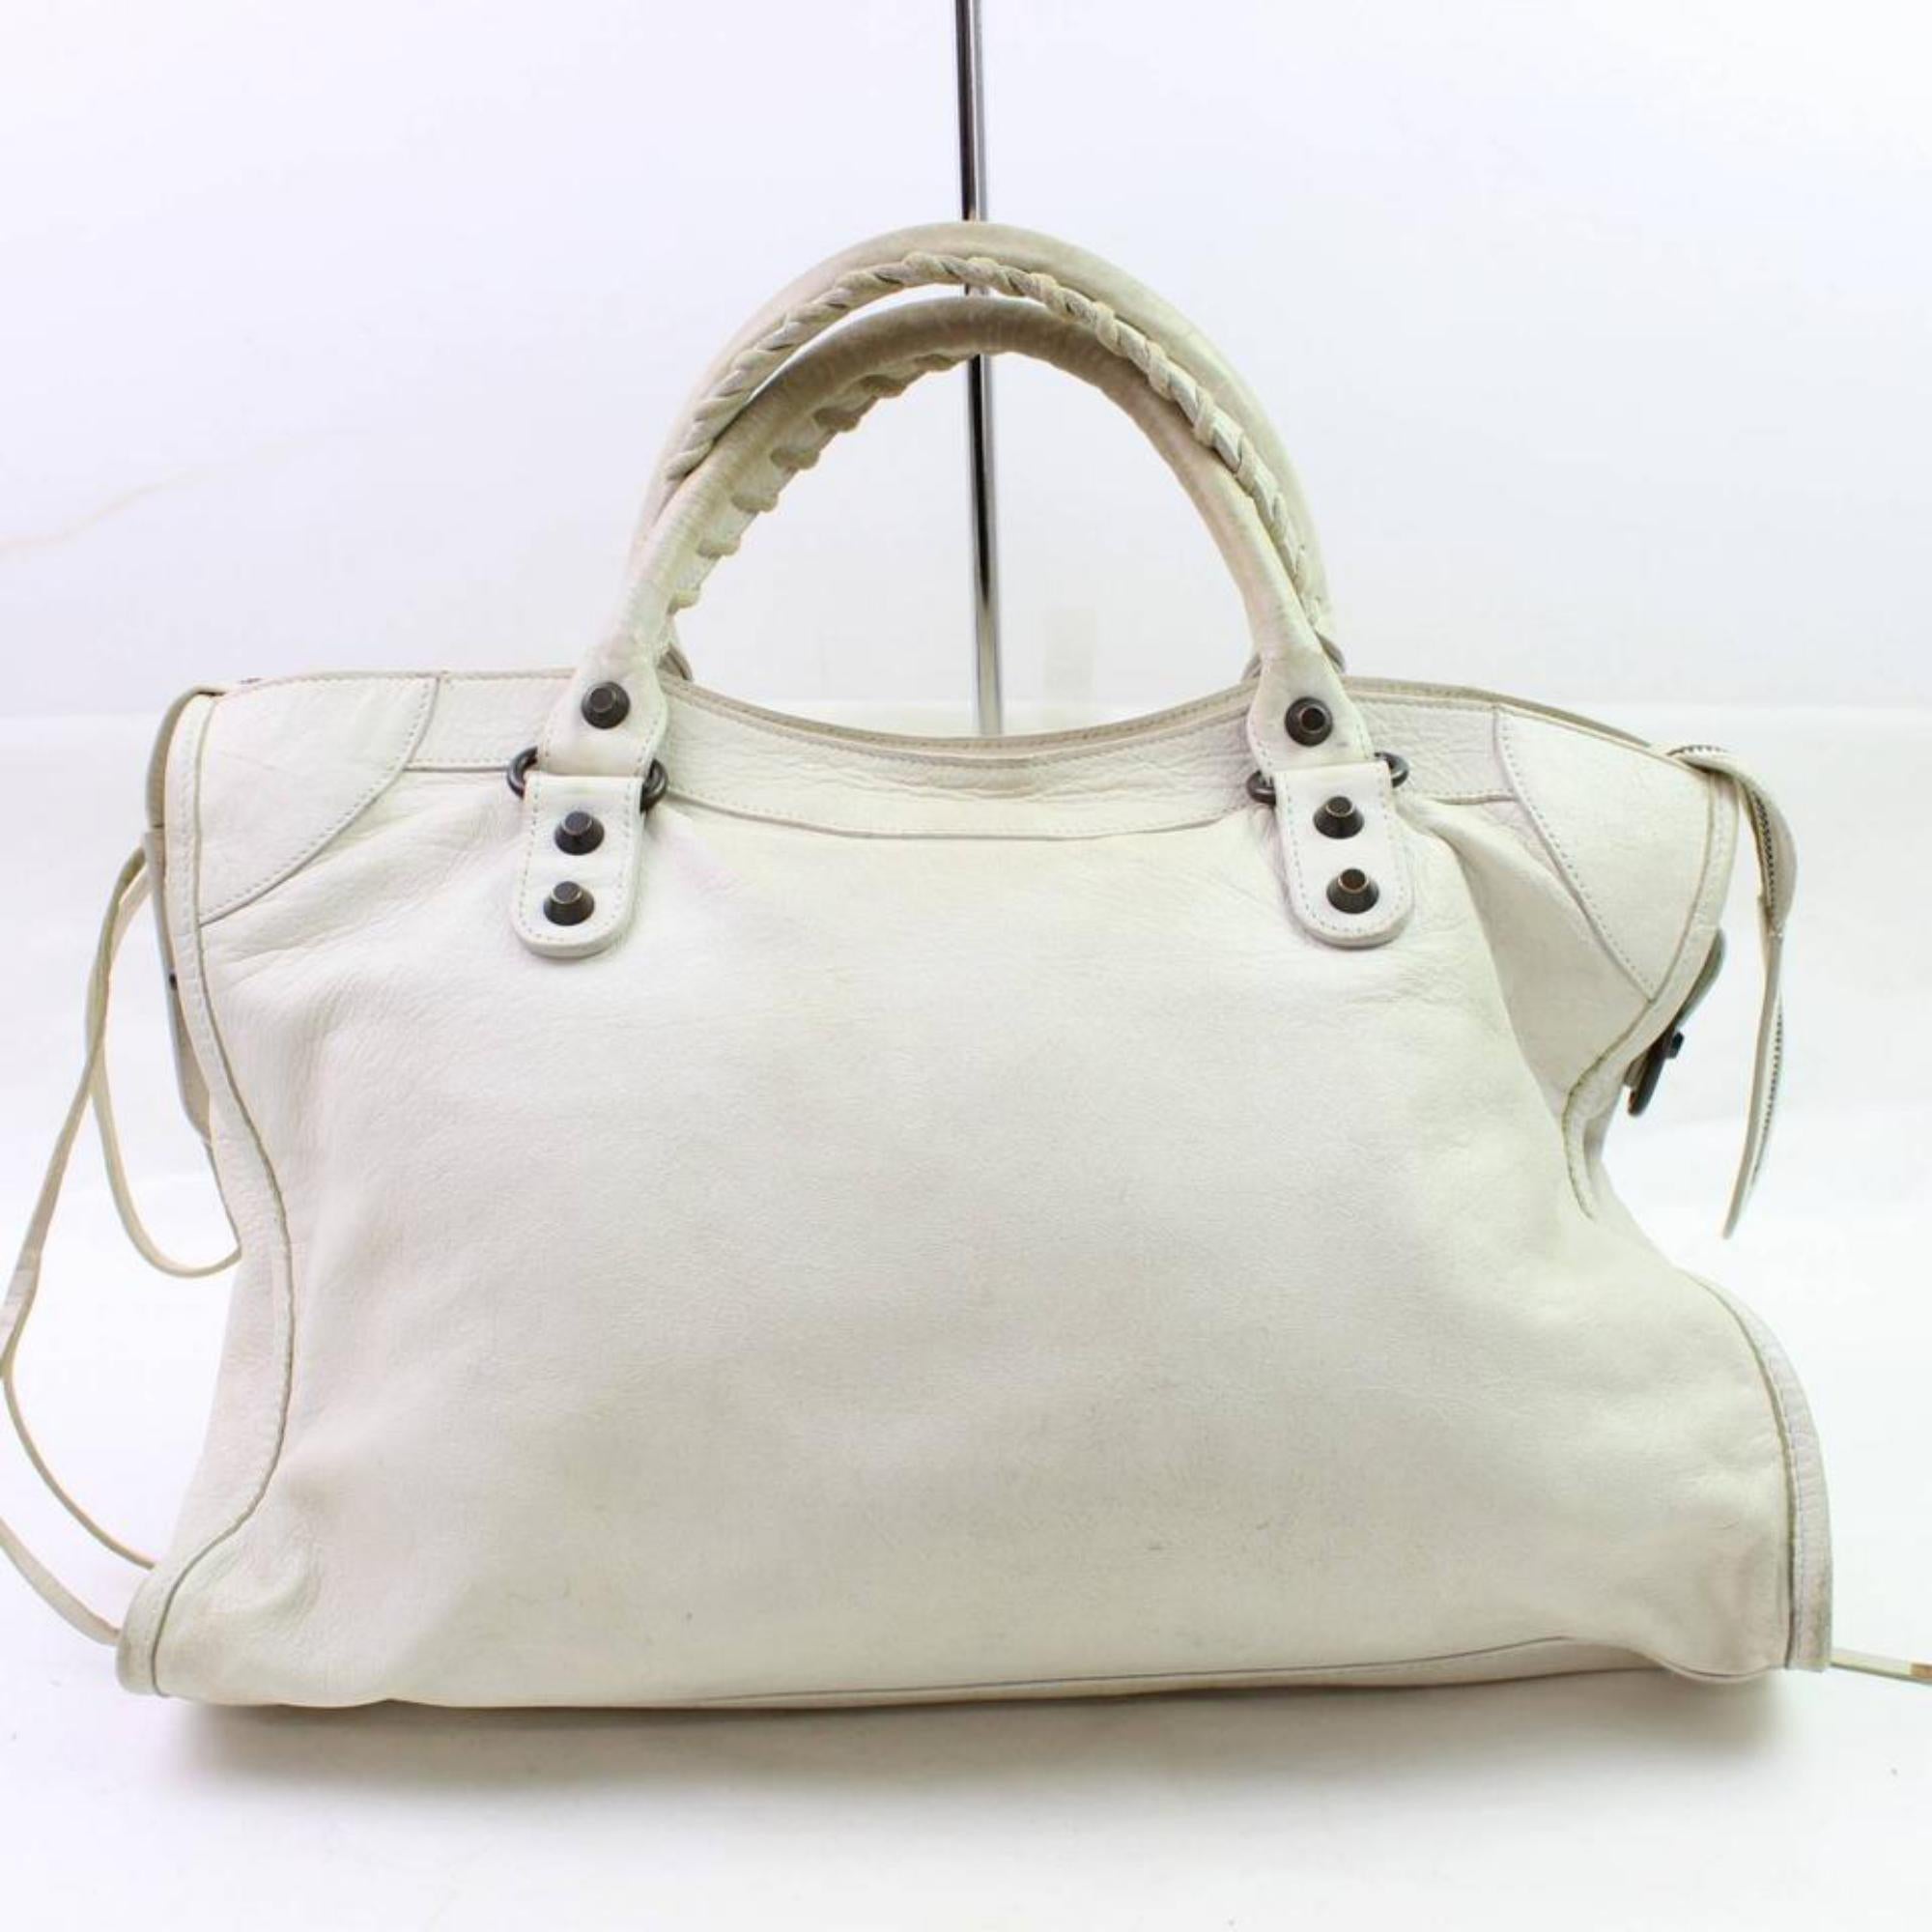 Women's Balenciaga The City 866187 Ivory Leather Shoulder Bag For Sale